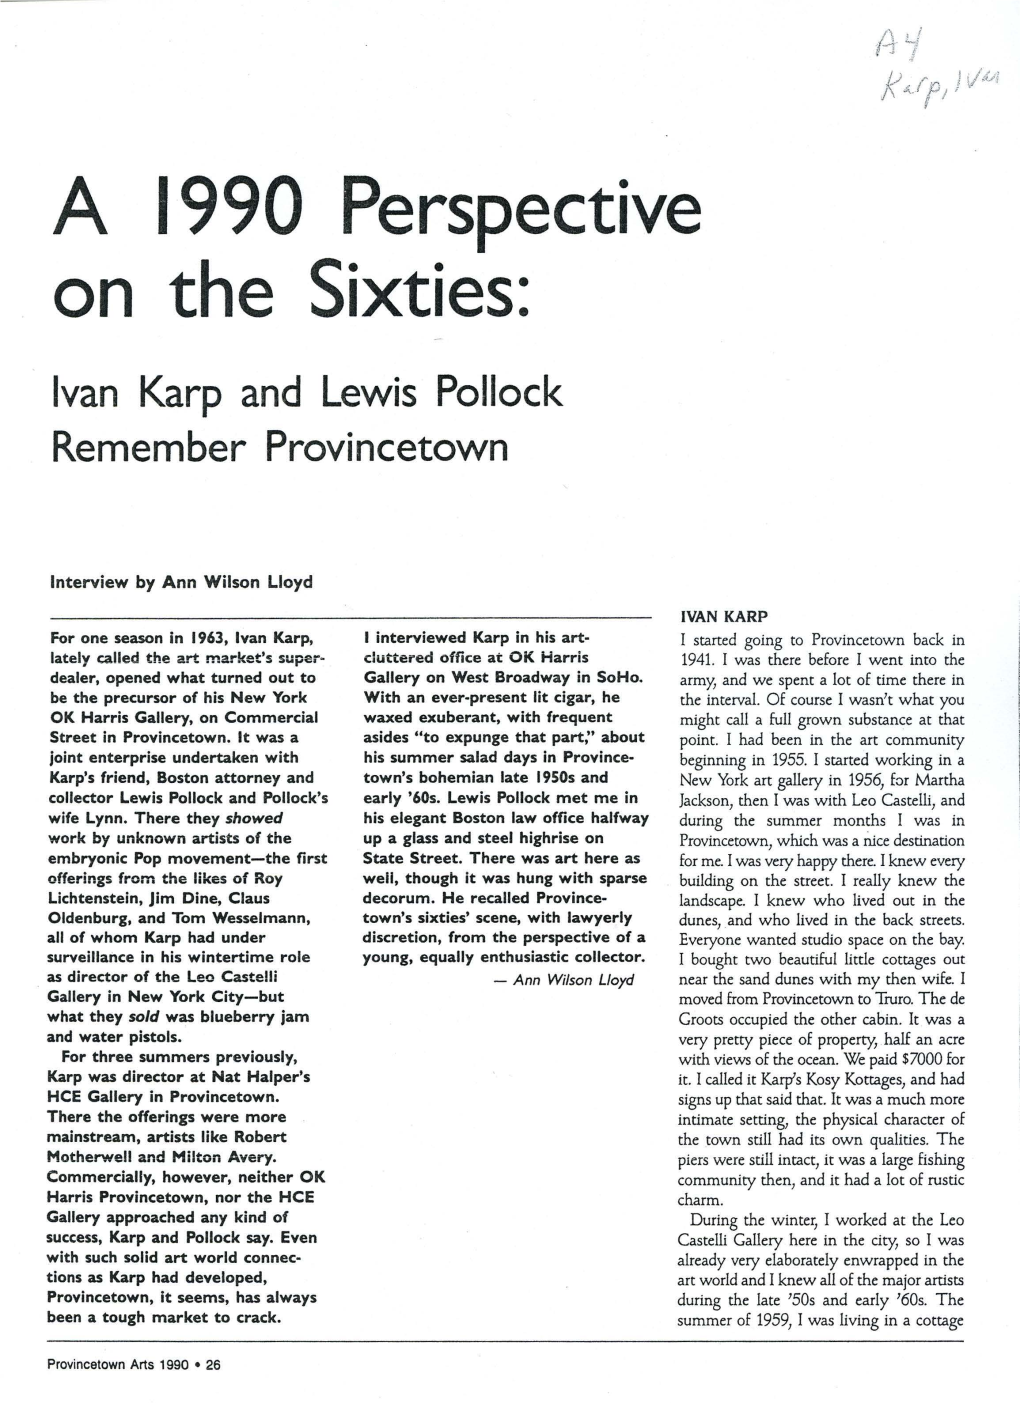 A 1990 Perspective on the Sixties